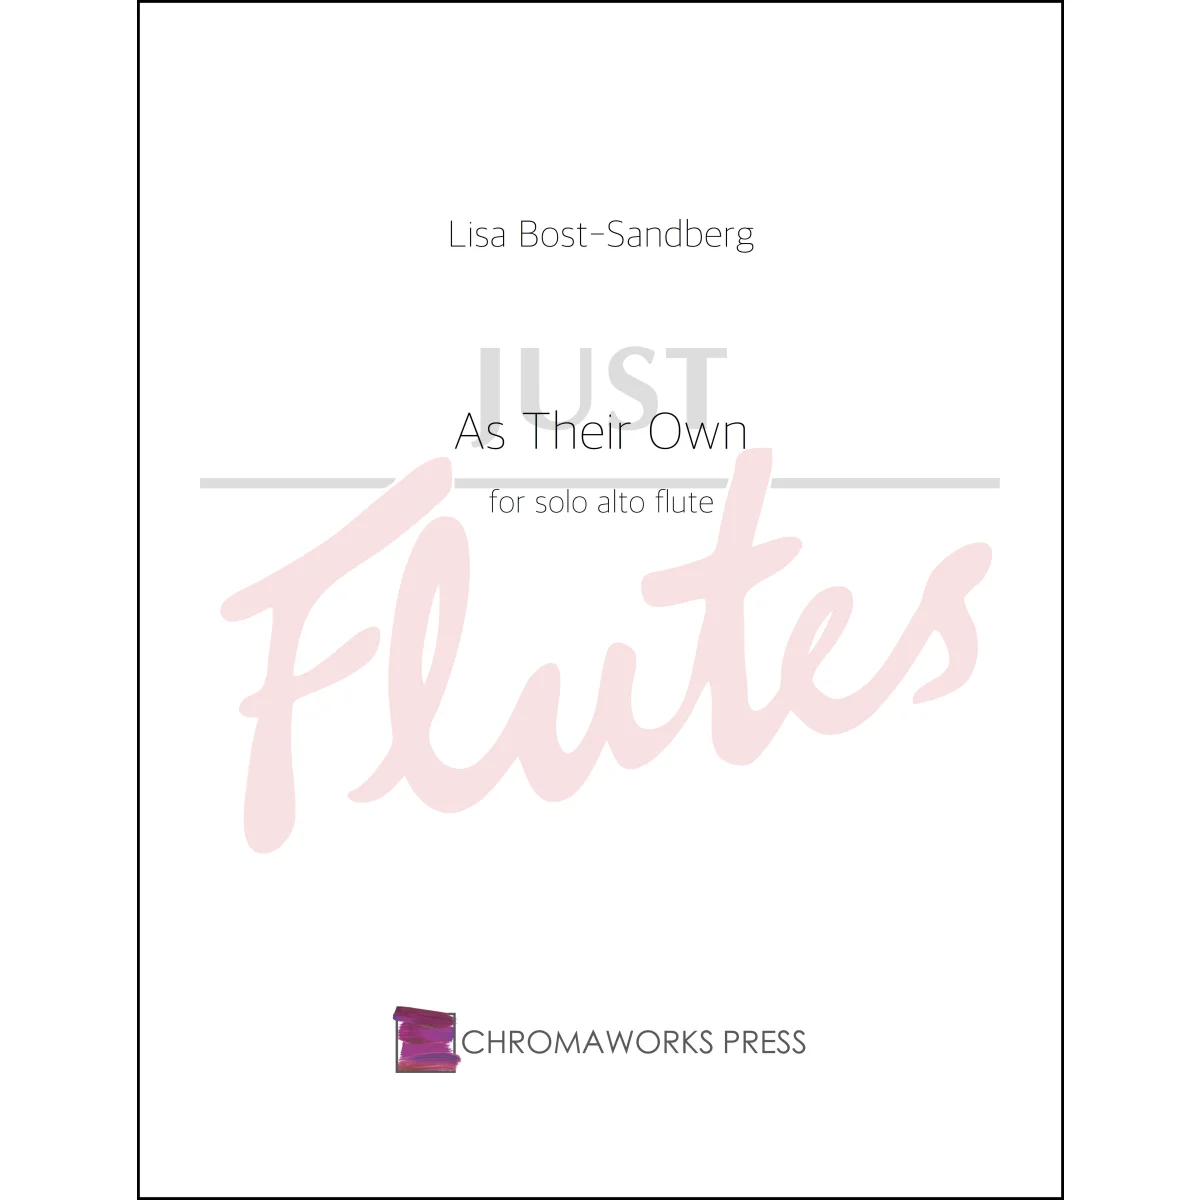 As Their Own for Solo Alto Flute